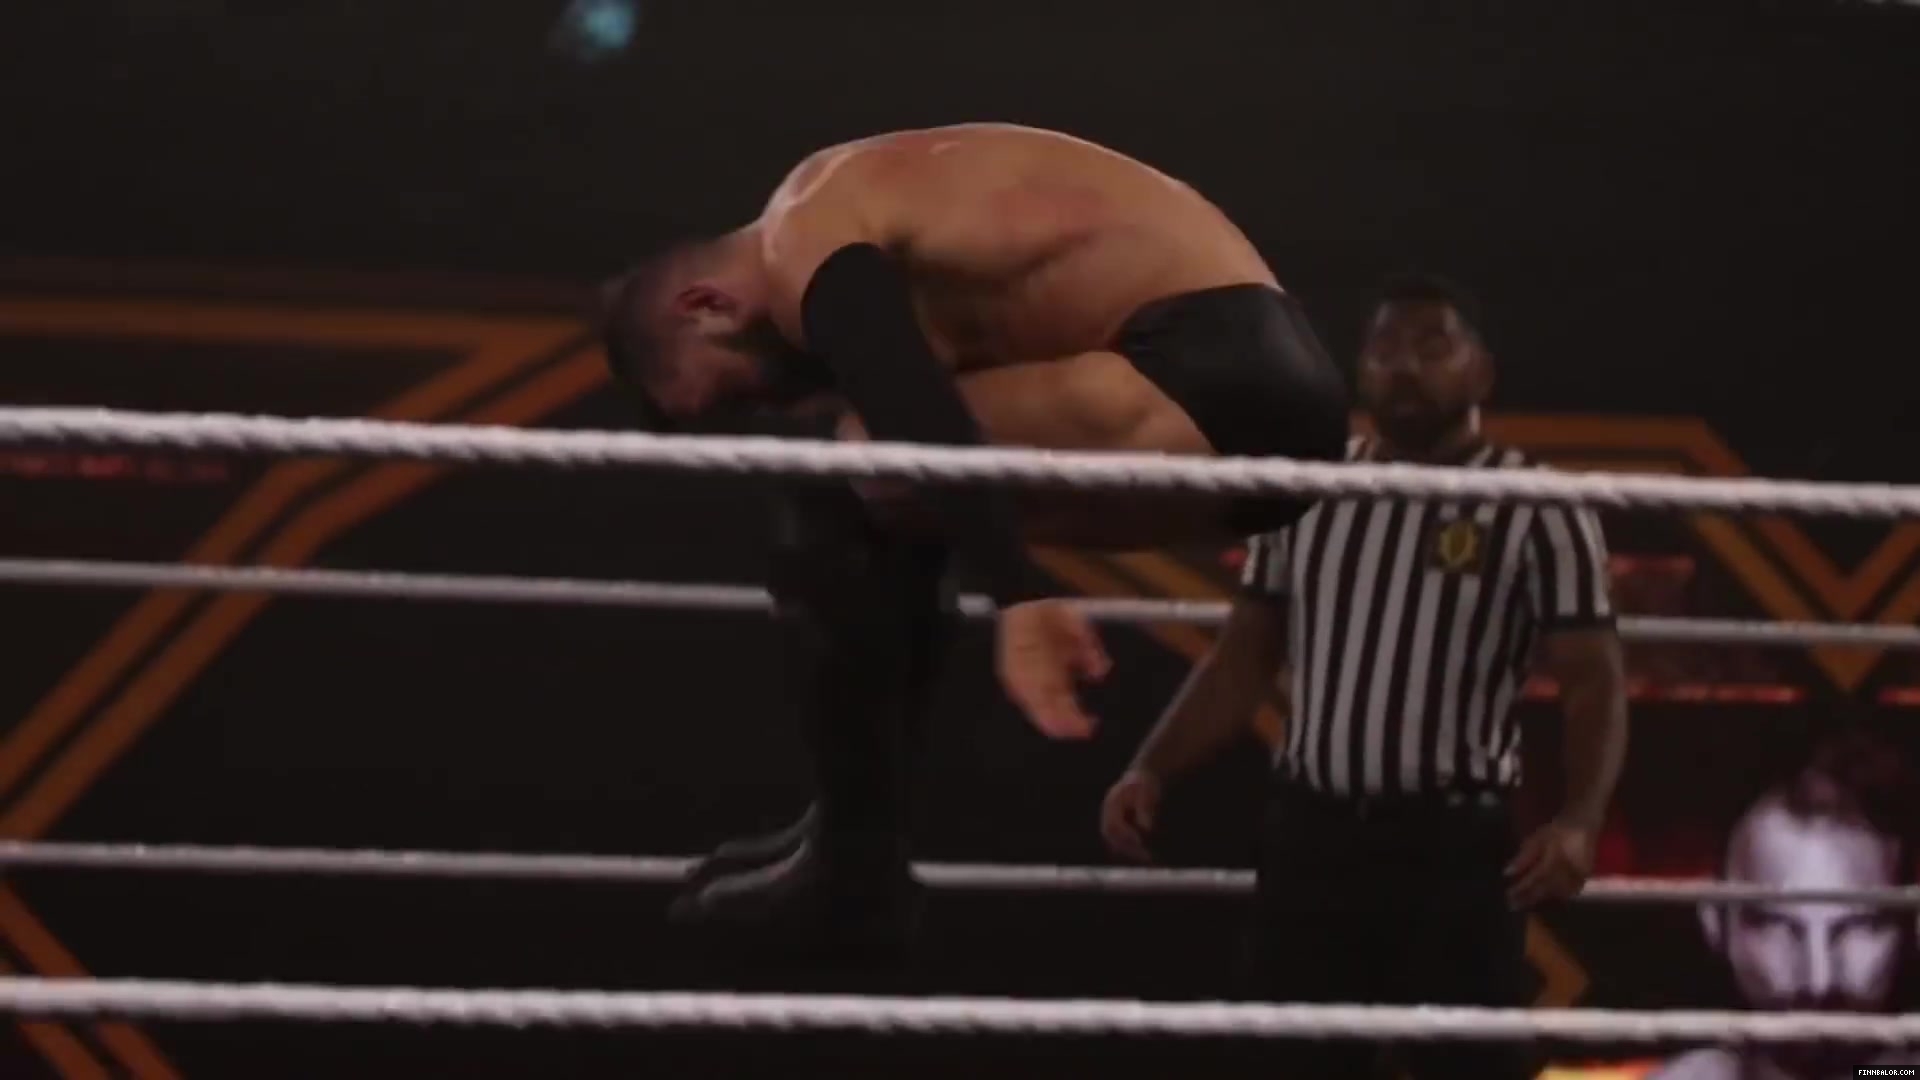 Finn_Balor___The_Rising_of_the_Prince_in_NXT_560.jpg